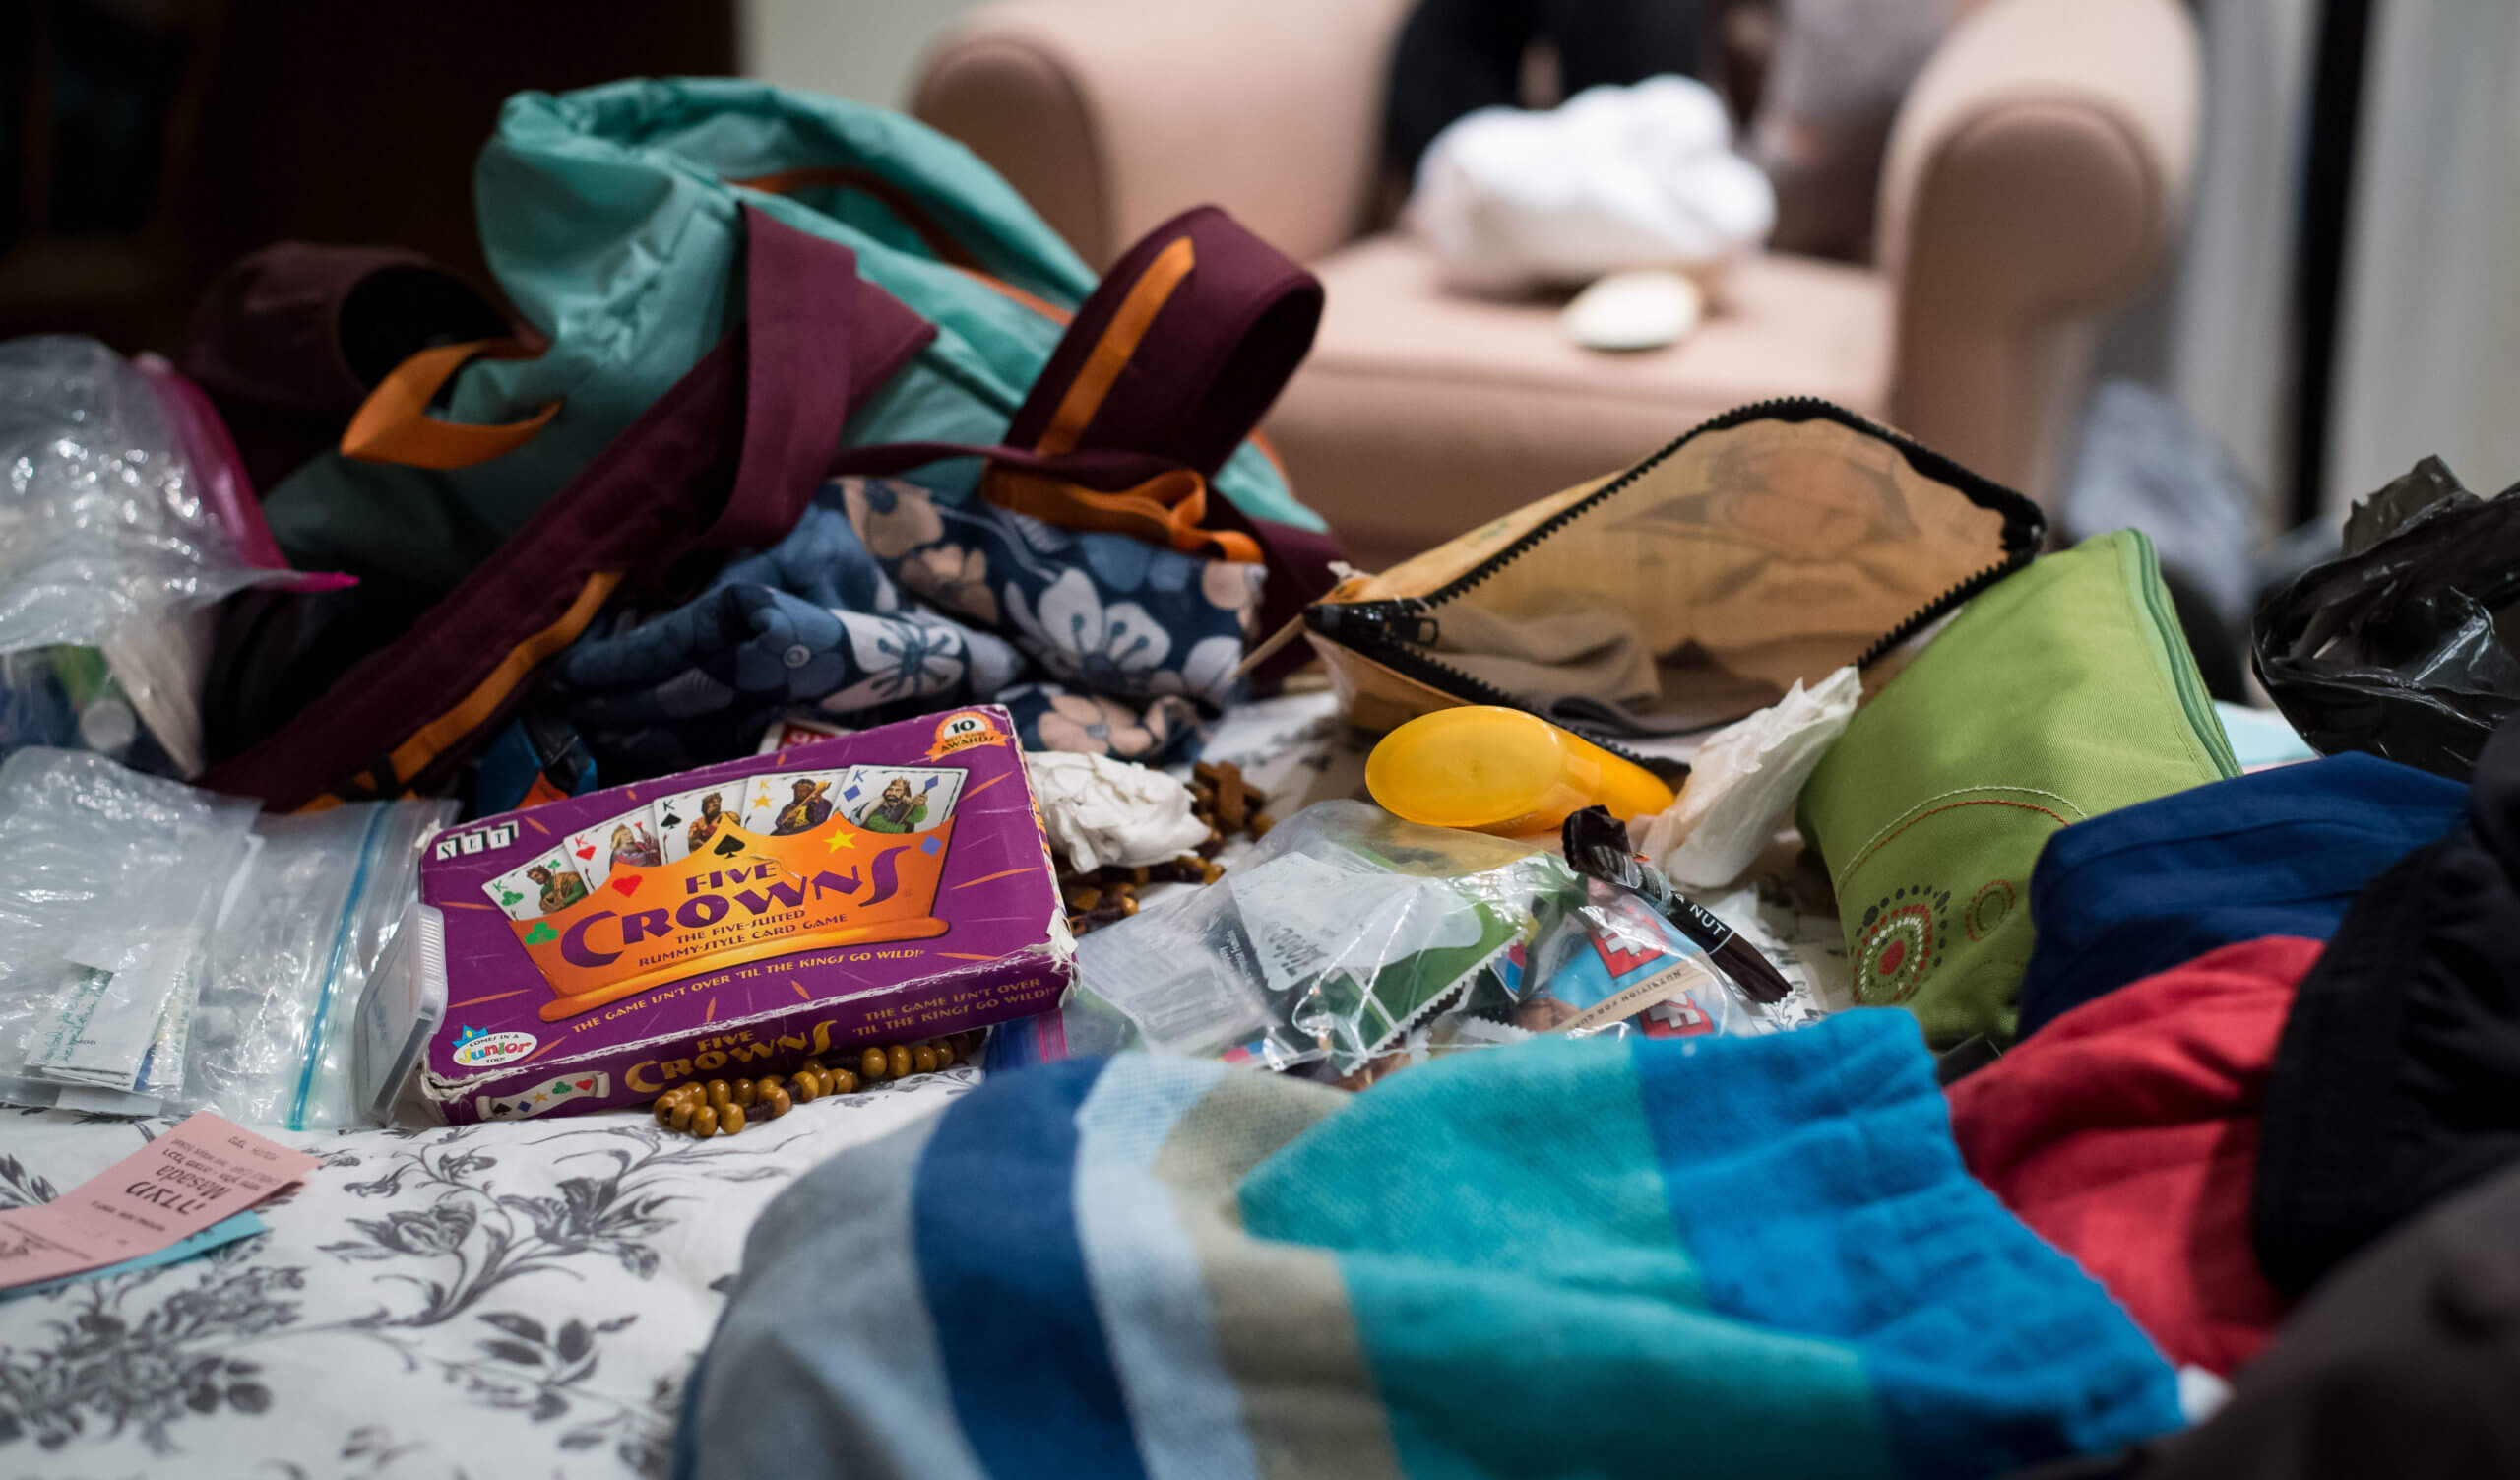 Items cover the surface of a bed and include backpacks, plastic bags, zippered pouches, and a card game labeled "The Crowns."